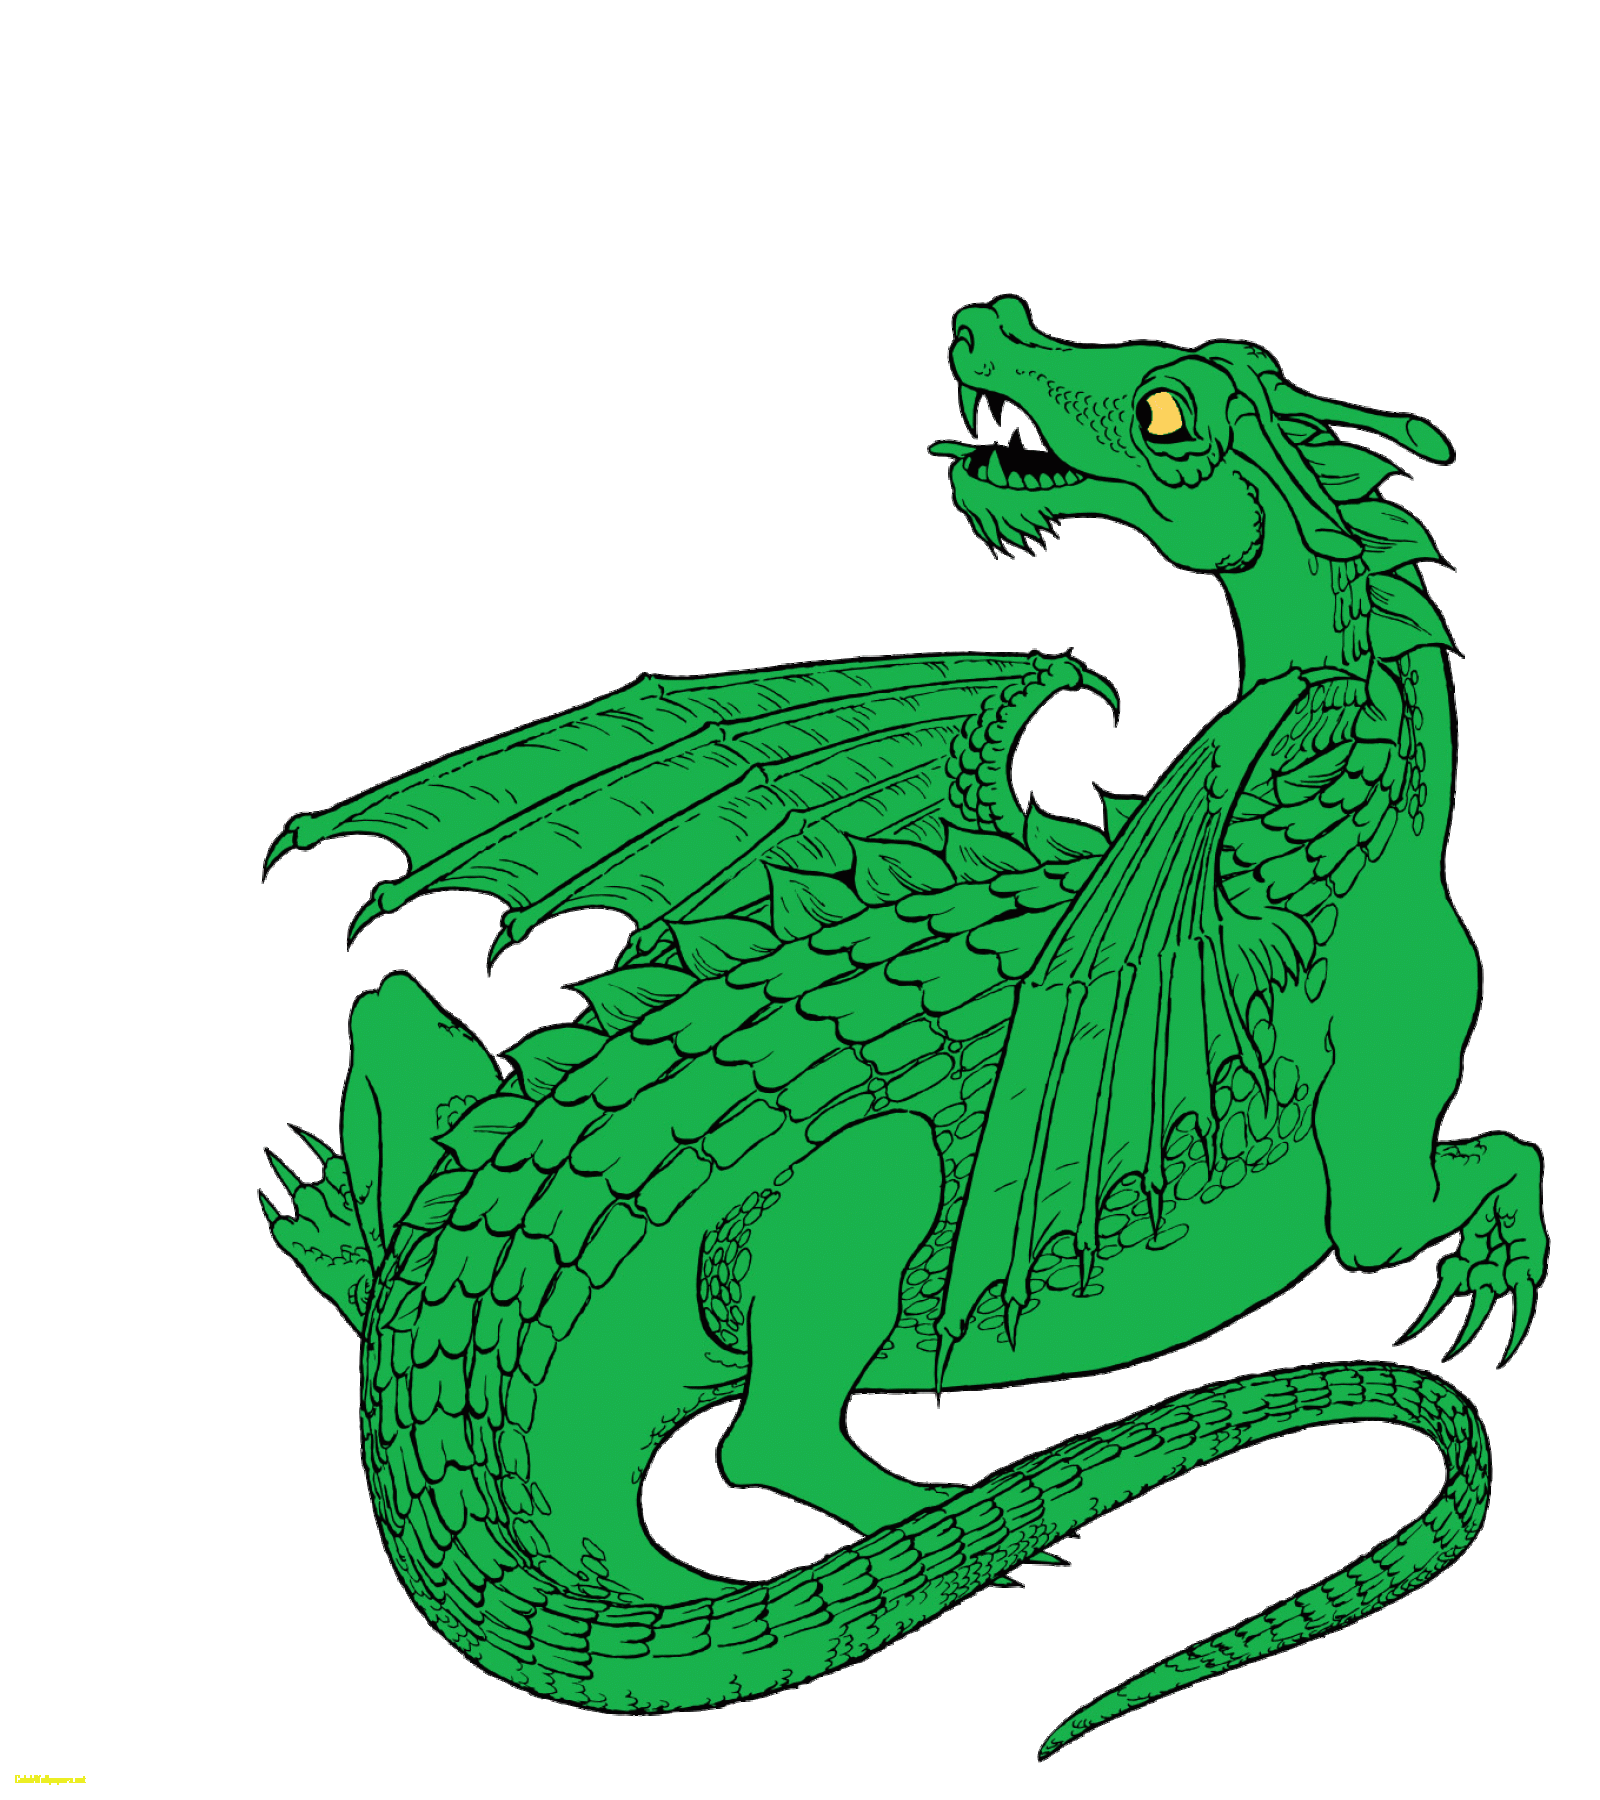 Clipart dragon animated. Image fresh free download